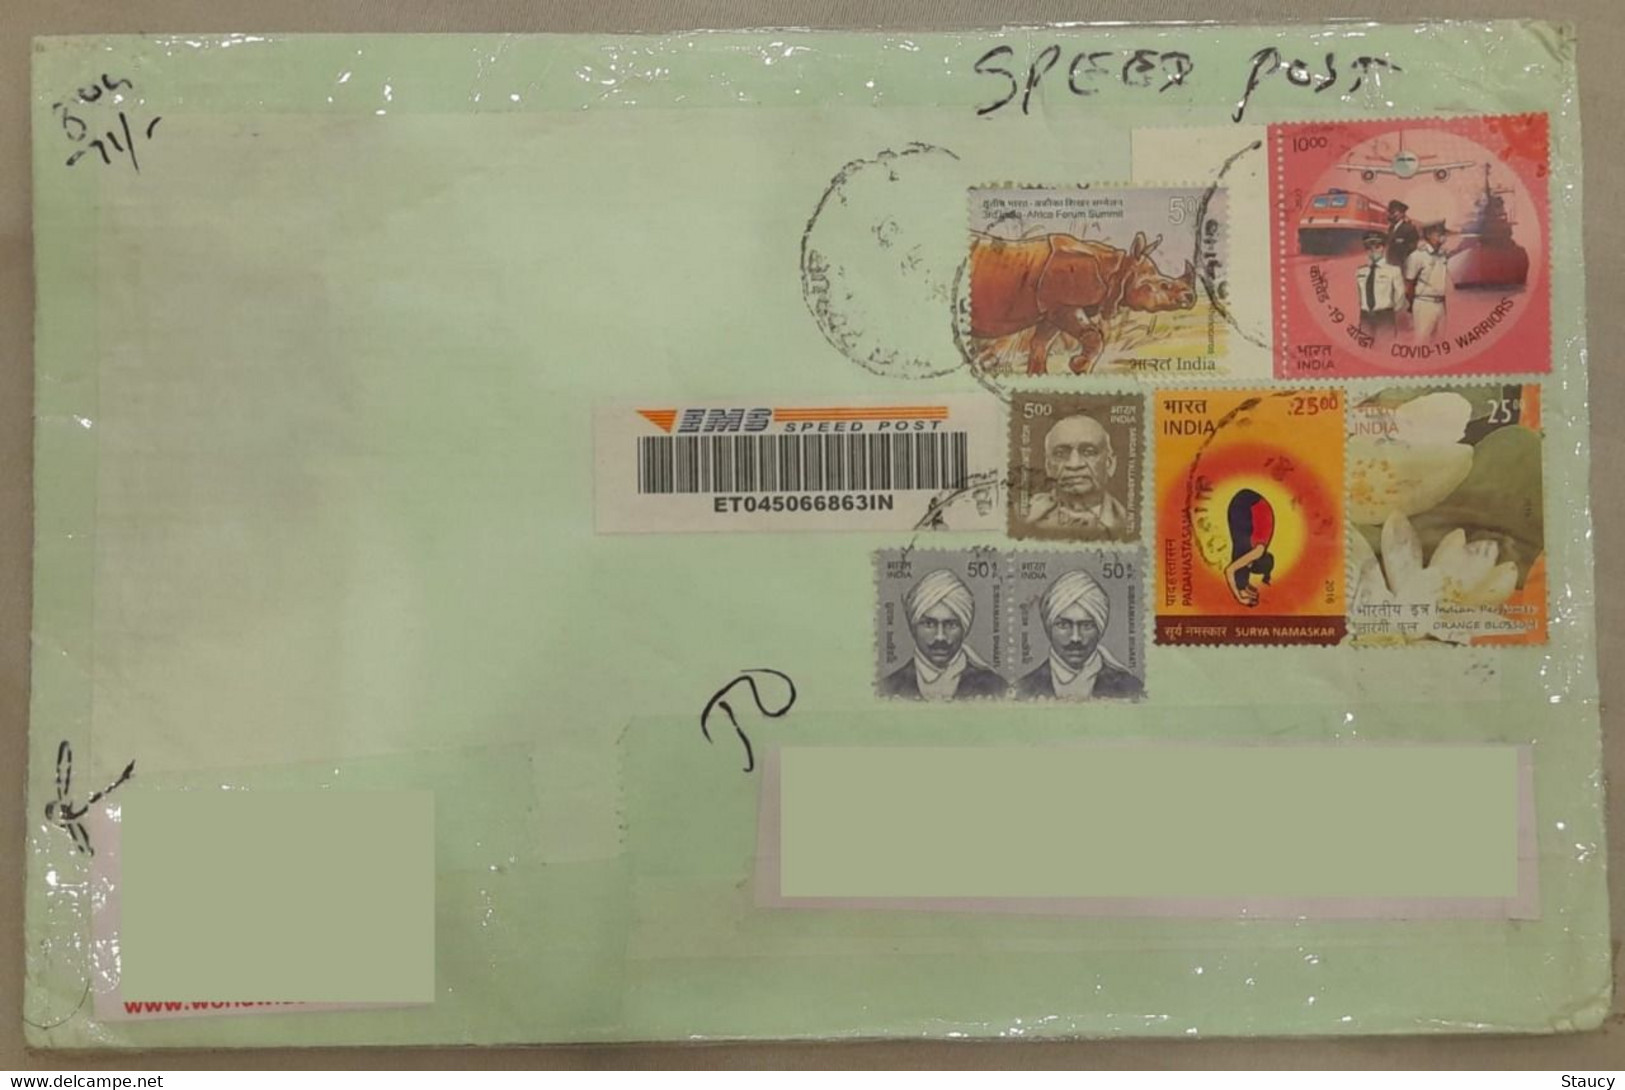 INDIA 2020 Salute To Pandemic / Covid-19 Warriors Stamp Franking On Registered Speed Post Cover As Per Scan - Droga